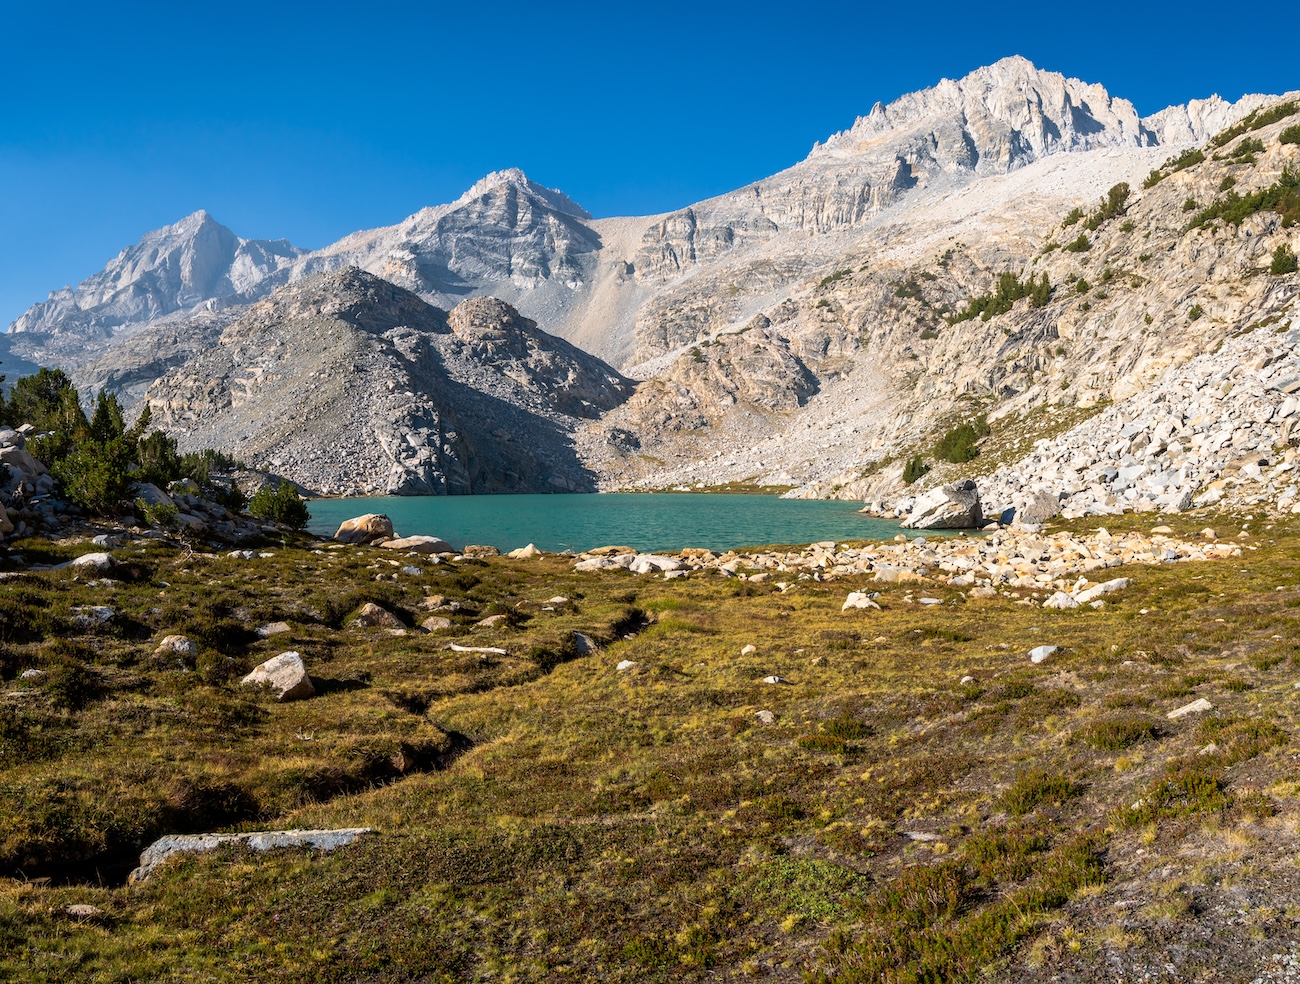 Upper Treasure Lake in The Little Lakes Valley of the Sierras. Photo by Brock Dallman